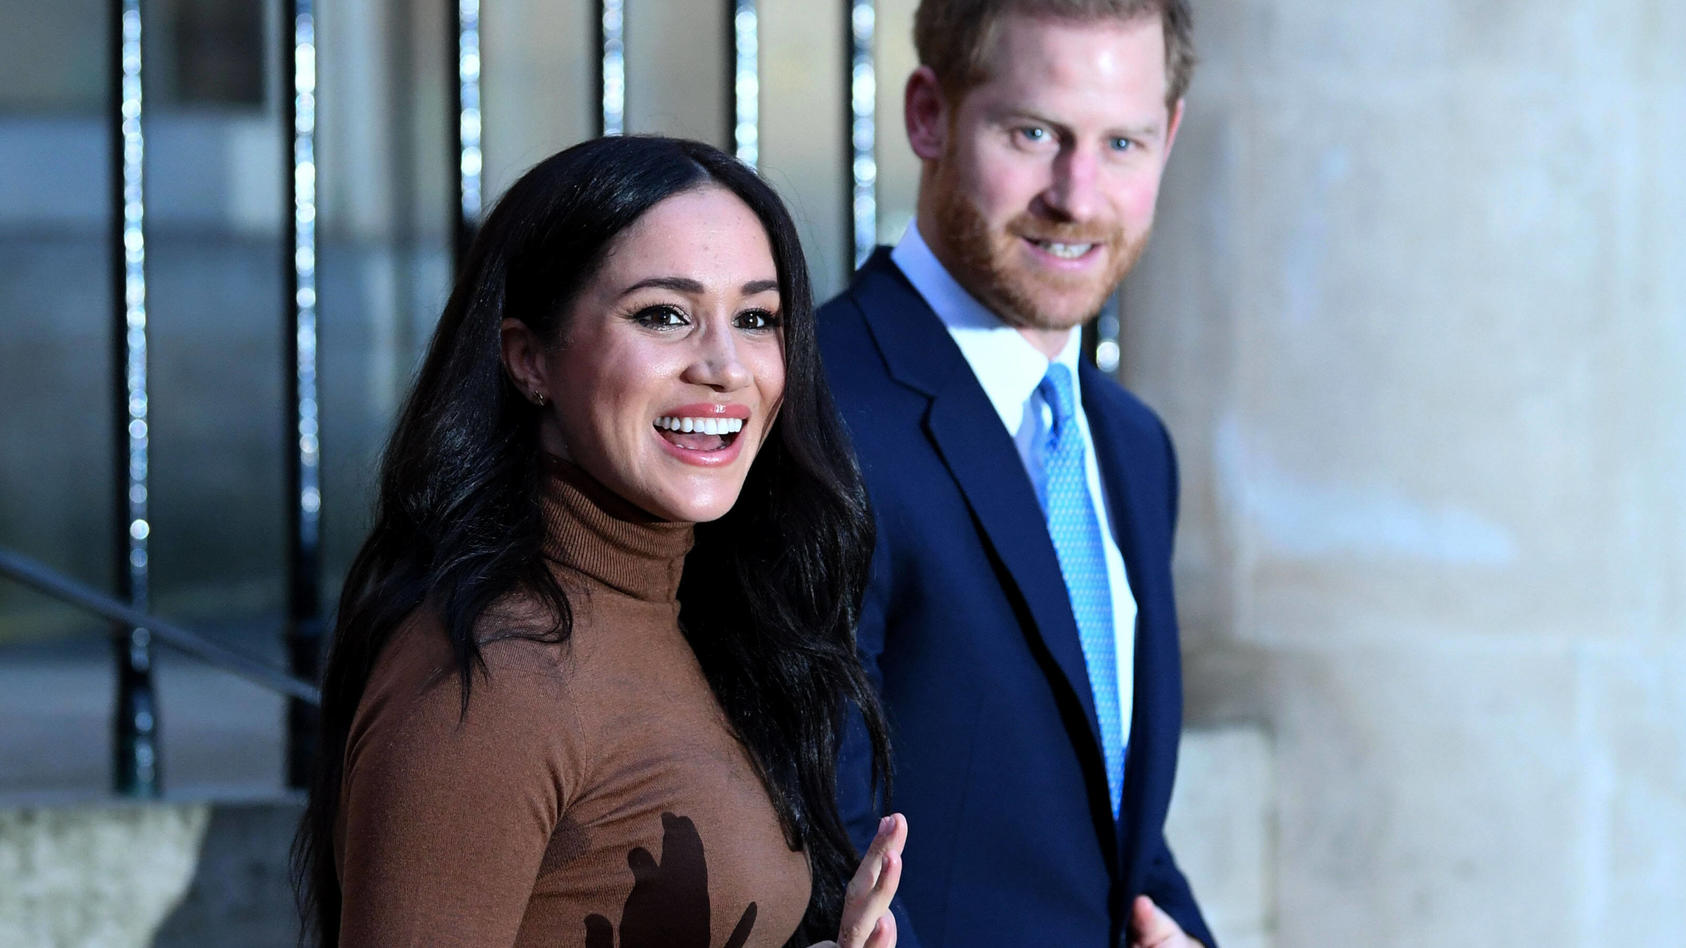  . 07/01/2020. London, United Kingdom. Prince Harry and Meghan Markle, the Duke and Duchess of Sussex, at Canada House in London after returning from their six week break from Royal duties. PUBLICATIONxINxGERxSUIxAUTxHUNxONLY xPoolx/xi-Imagesx IIM-20